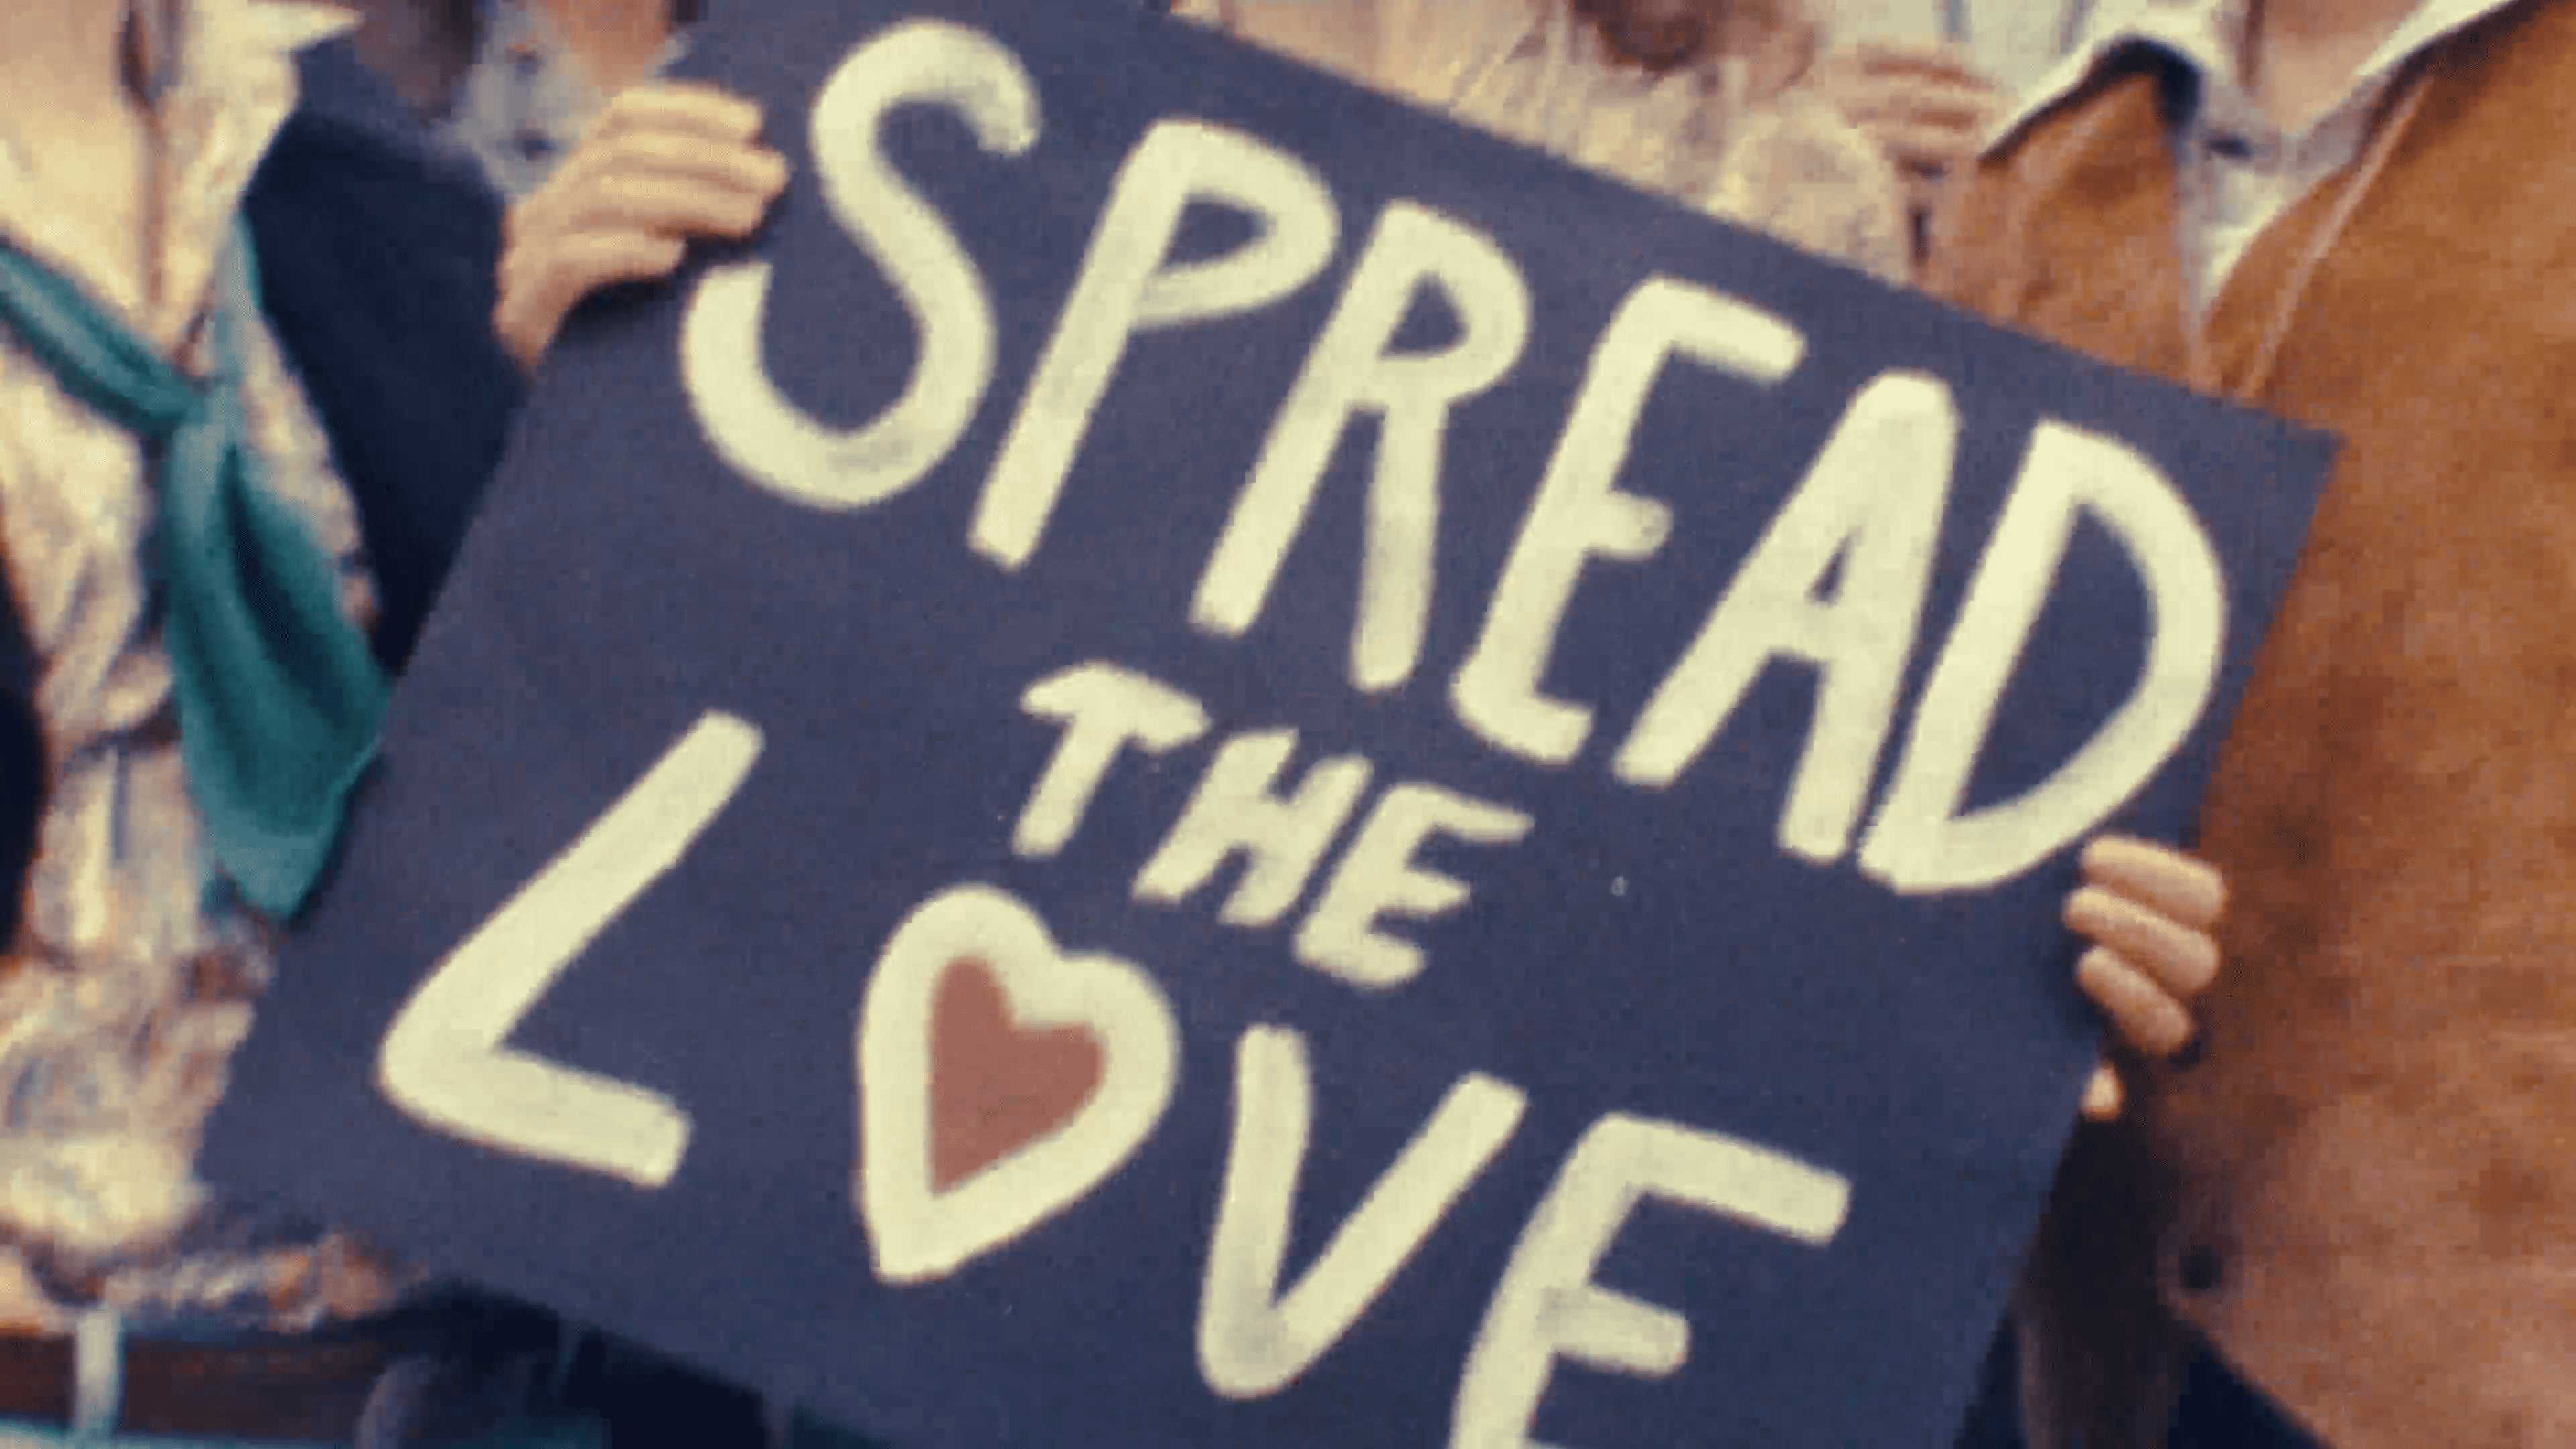 A photo of a sign that says "Spread The Love"